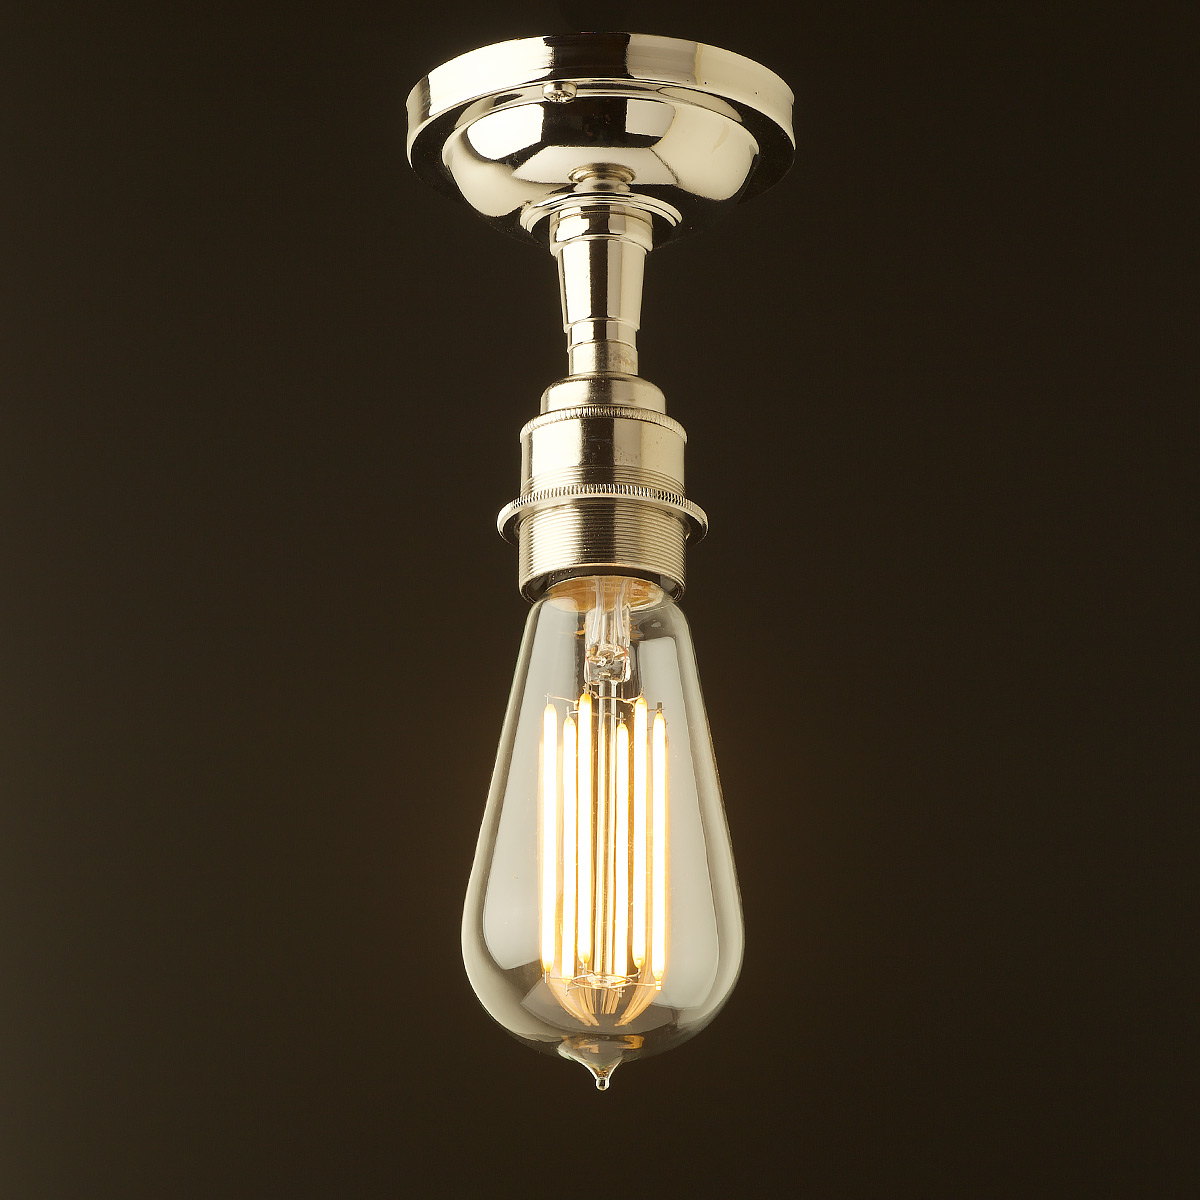 Edison Screw Metal and Ceramic Earthed Bulb Holder in Silver Nickel Finish E27